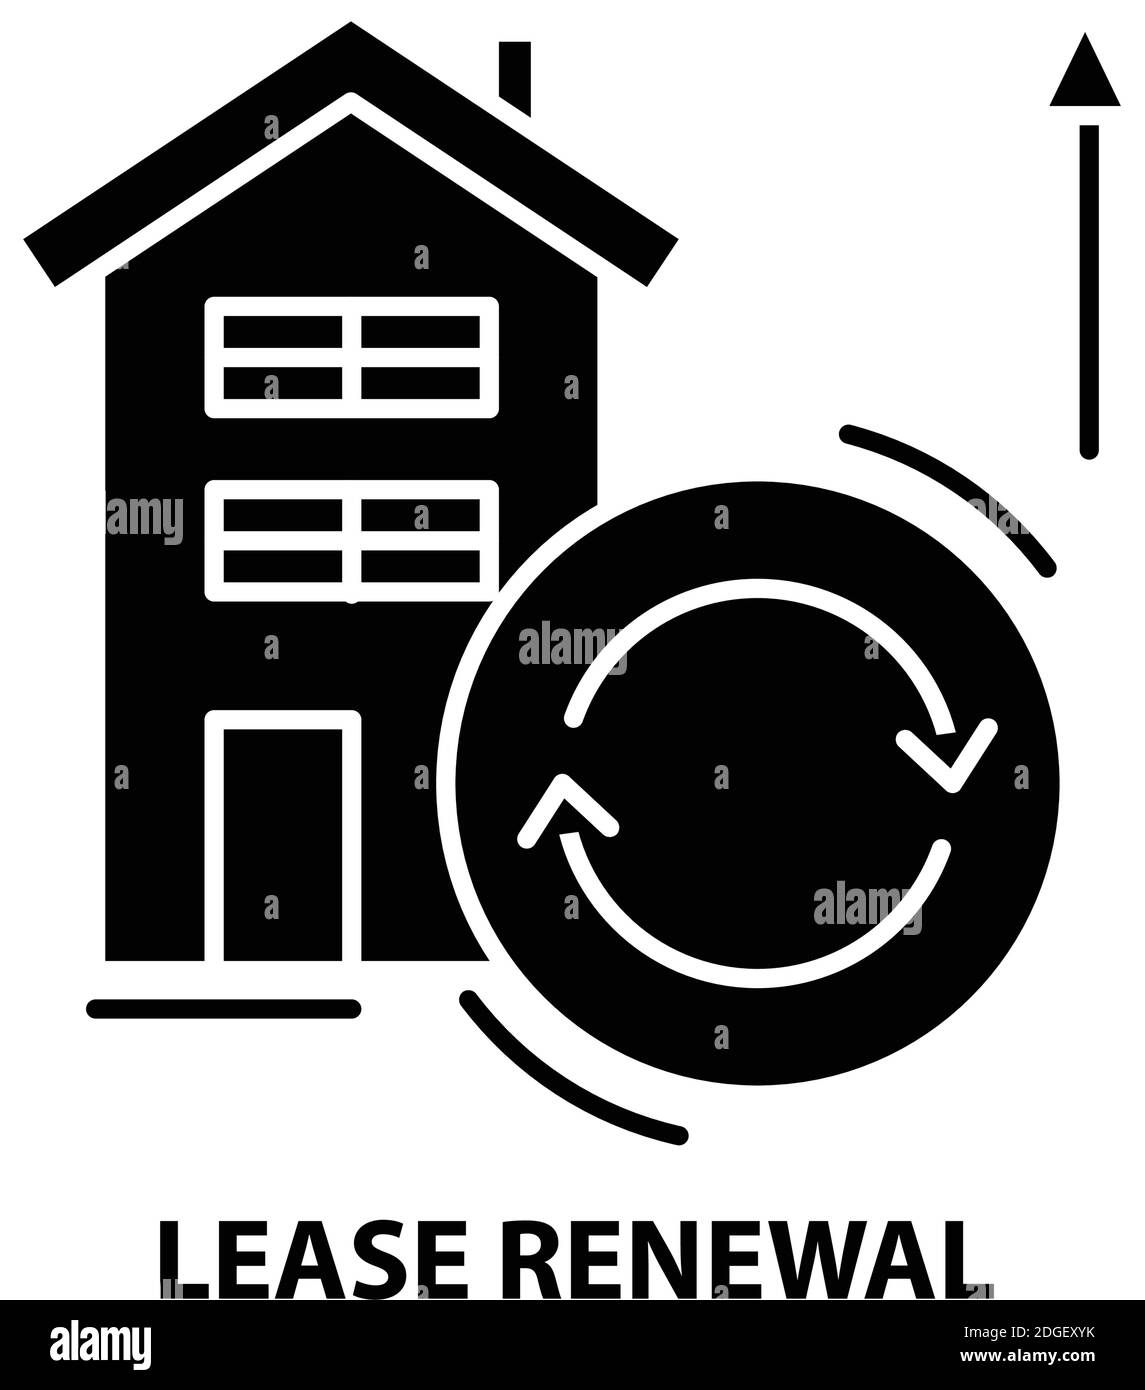 lease renewal icon, black vector sign with editable strokes, concept illustration Stock Vector